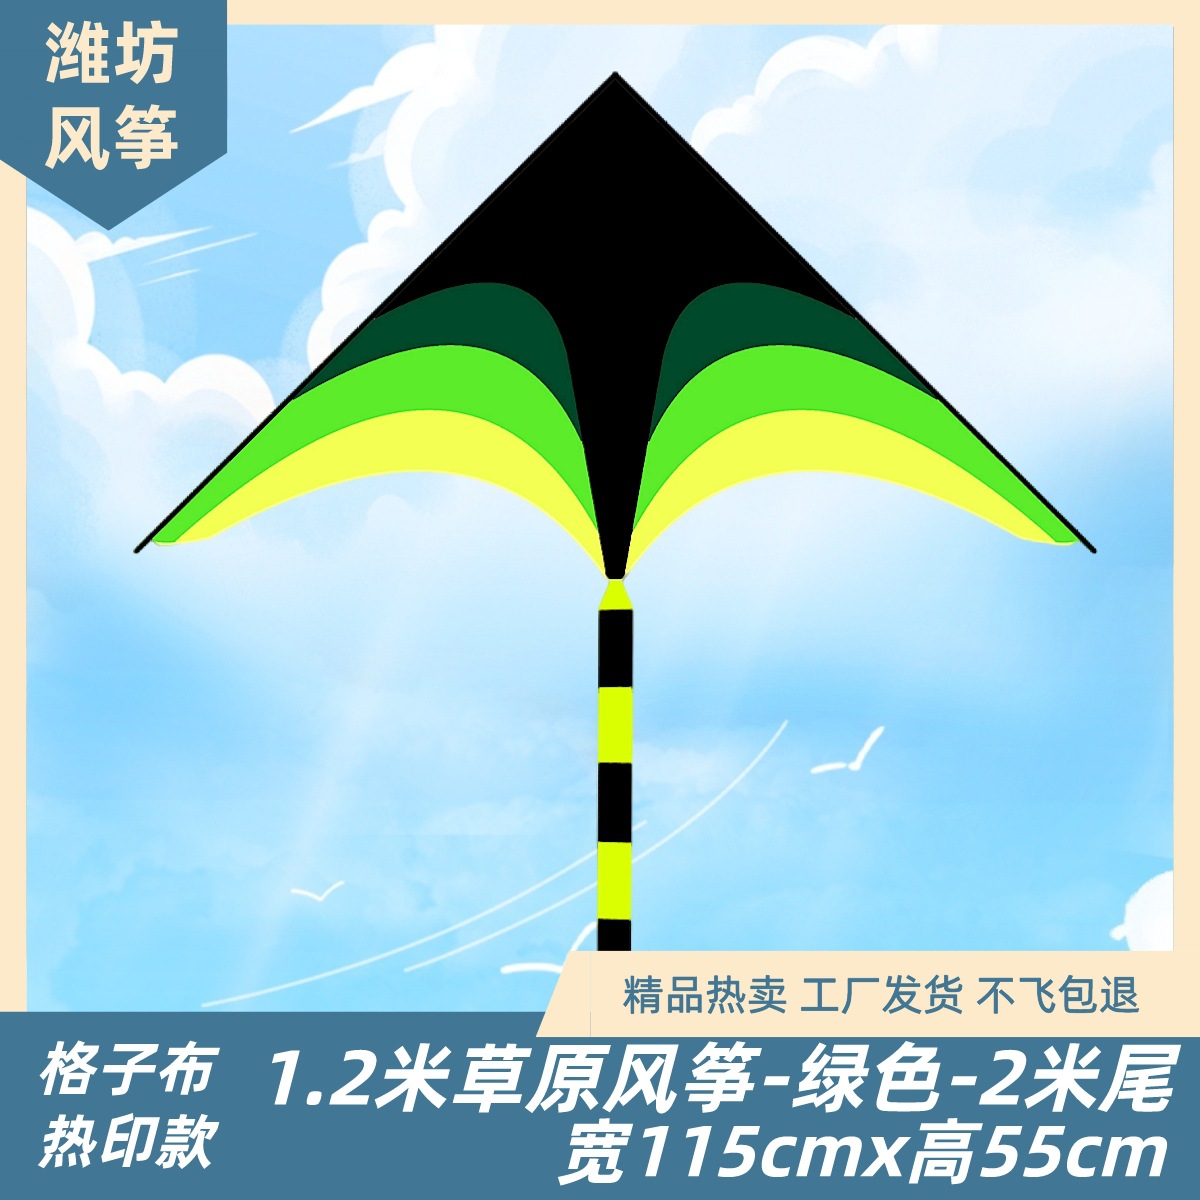 Weifang Kite New Prairie Kite Adult and Children Kite with Kite Line Breeze Easy to Fly Factory Wholesale